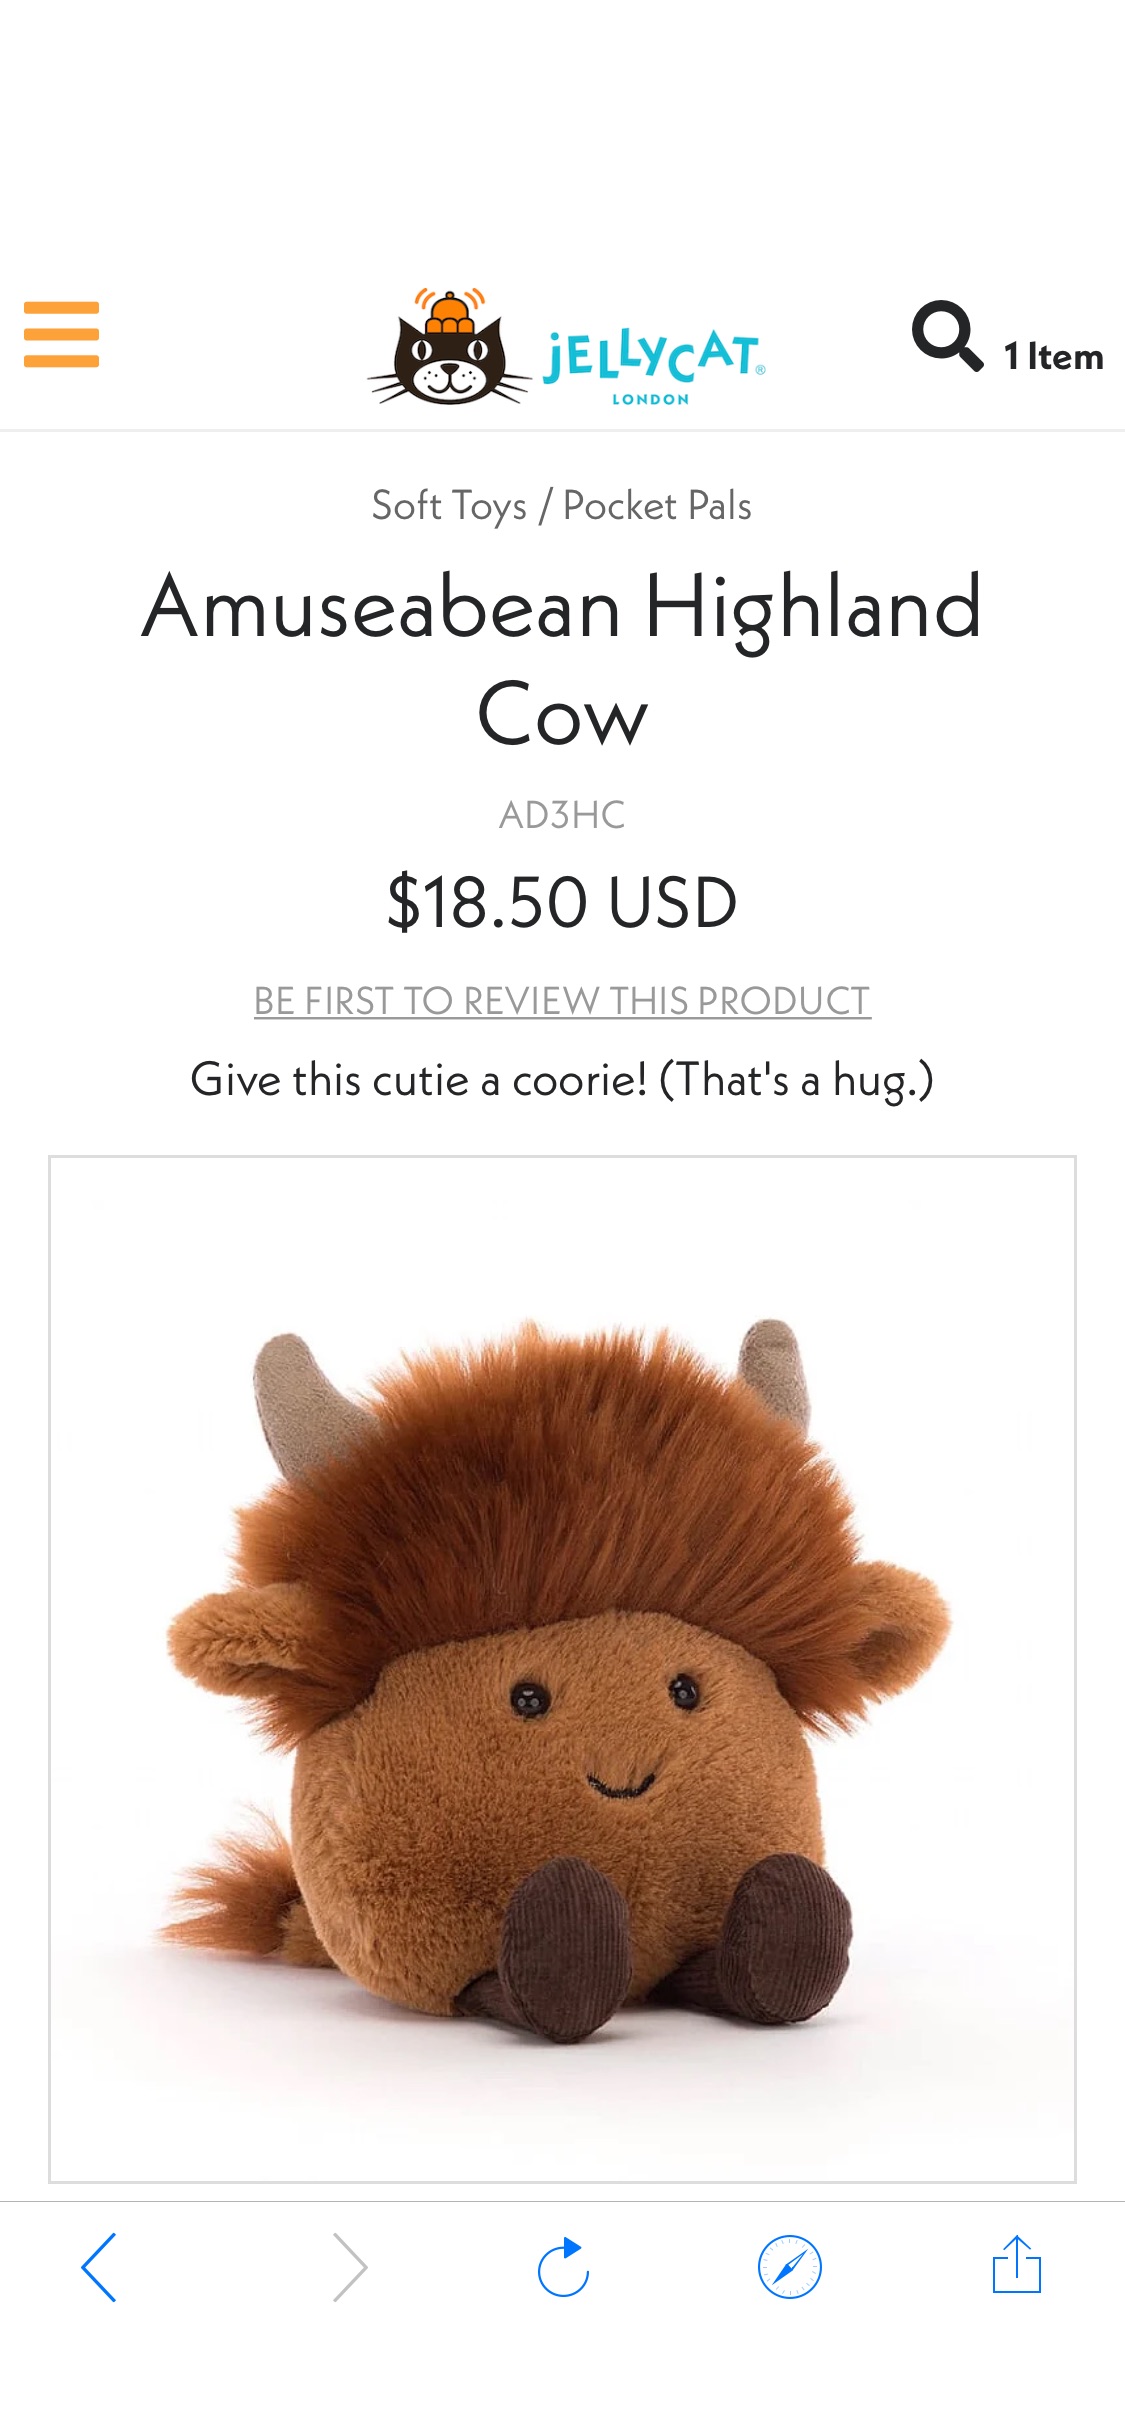 Buy Amuseabean Highland Cow - Online at Jellycat.com